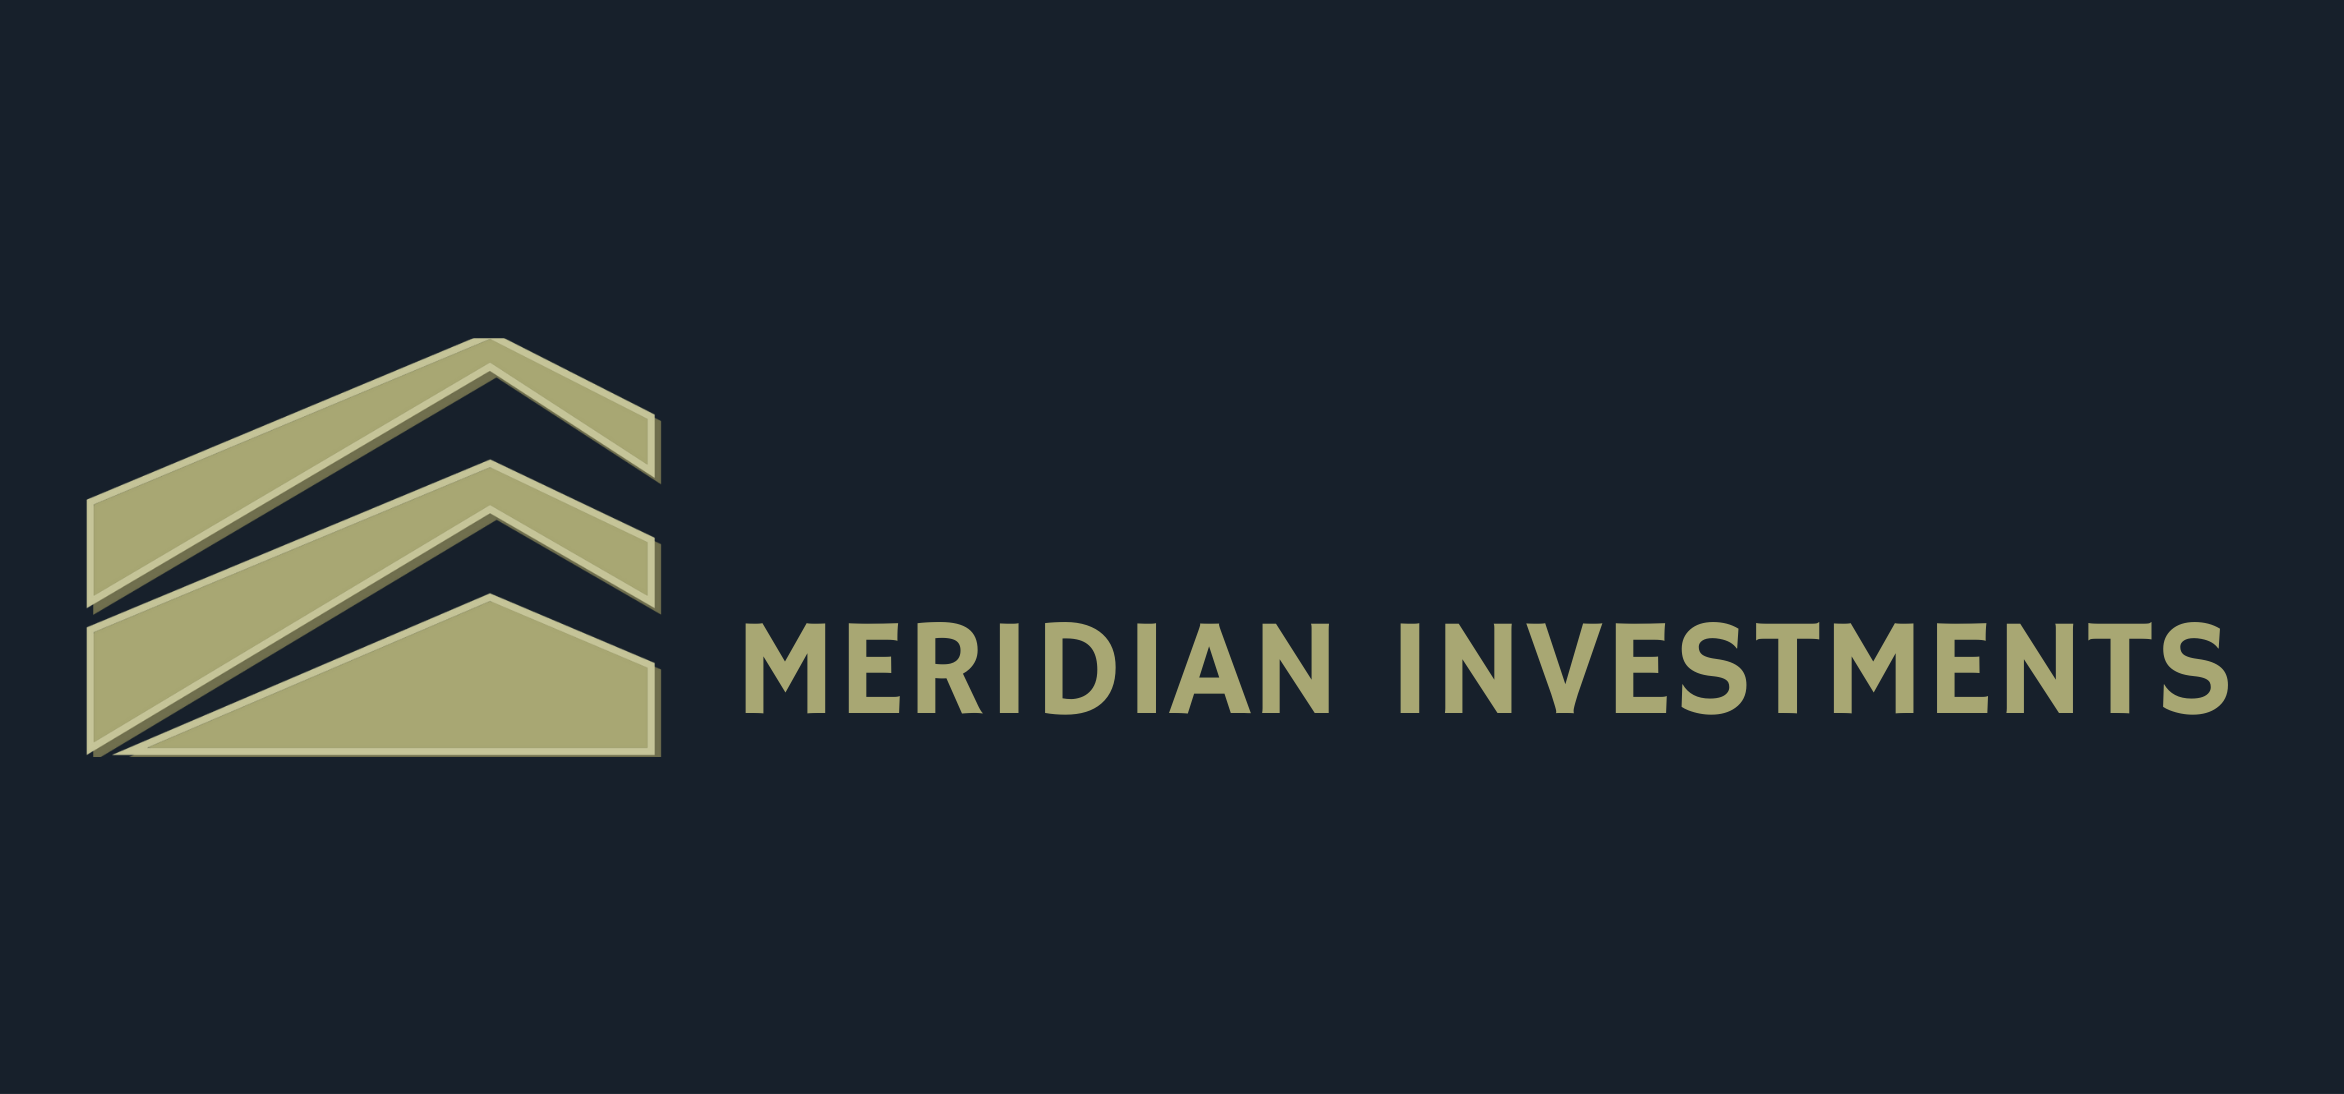 Meridian Investments logo